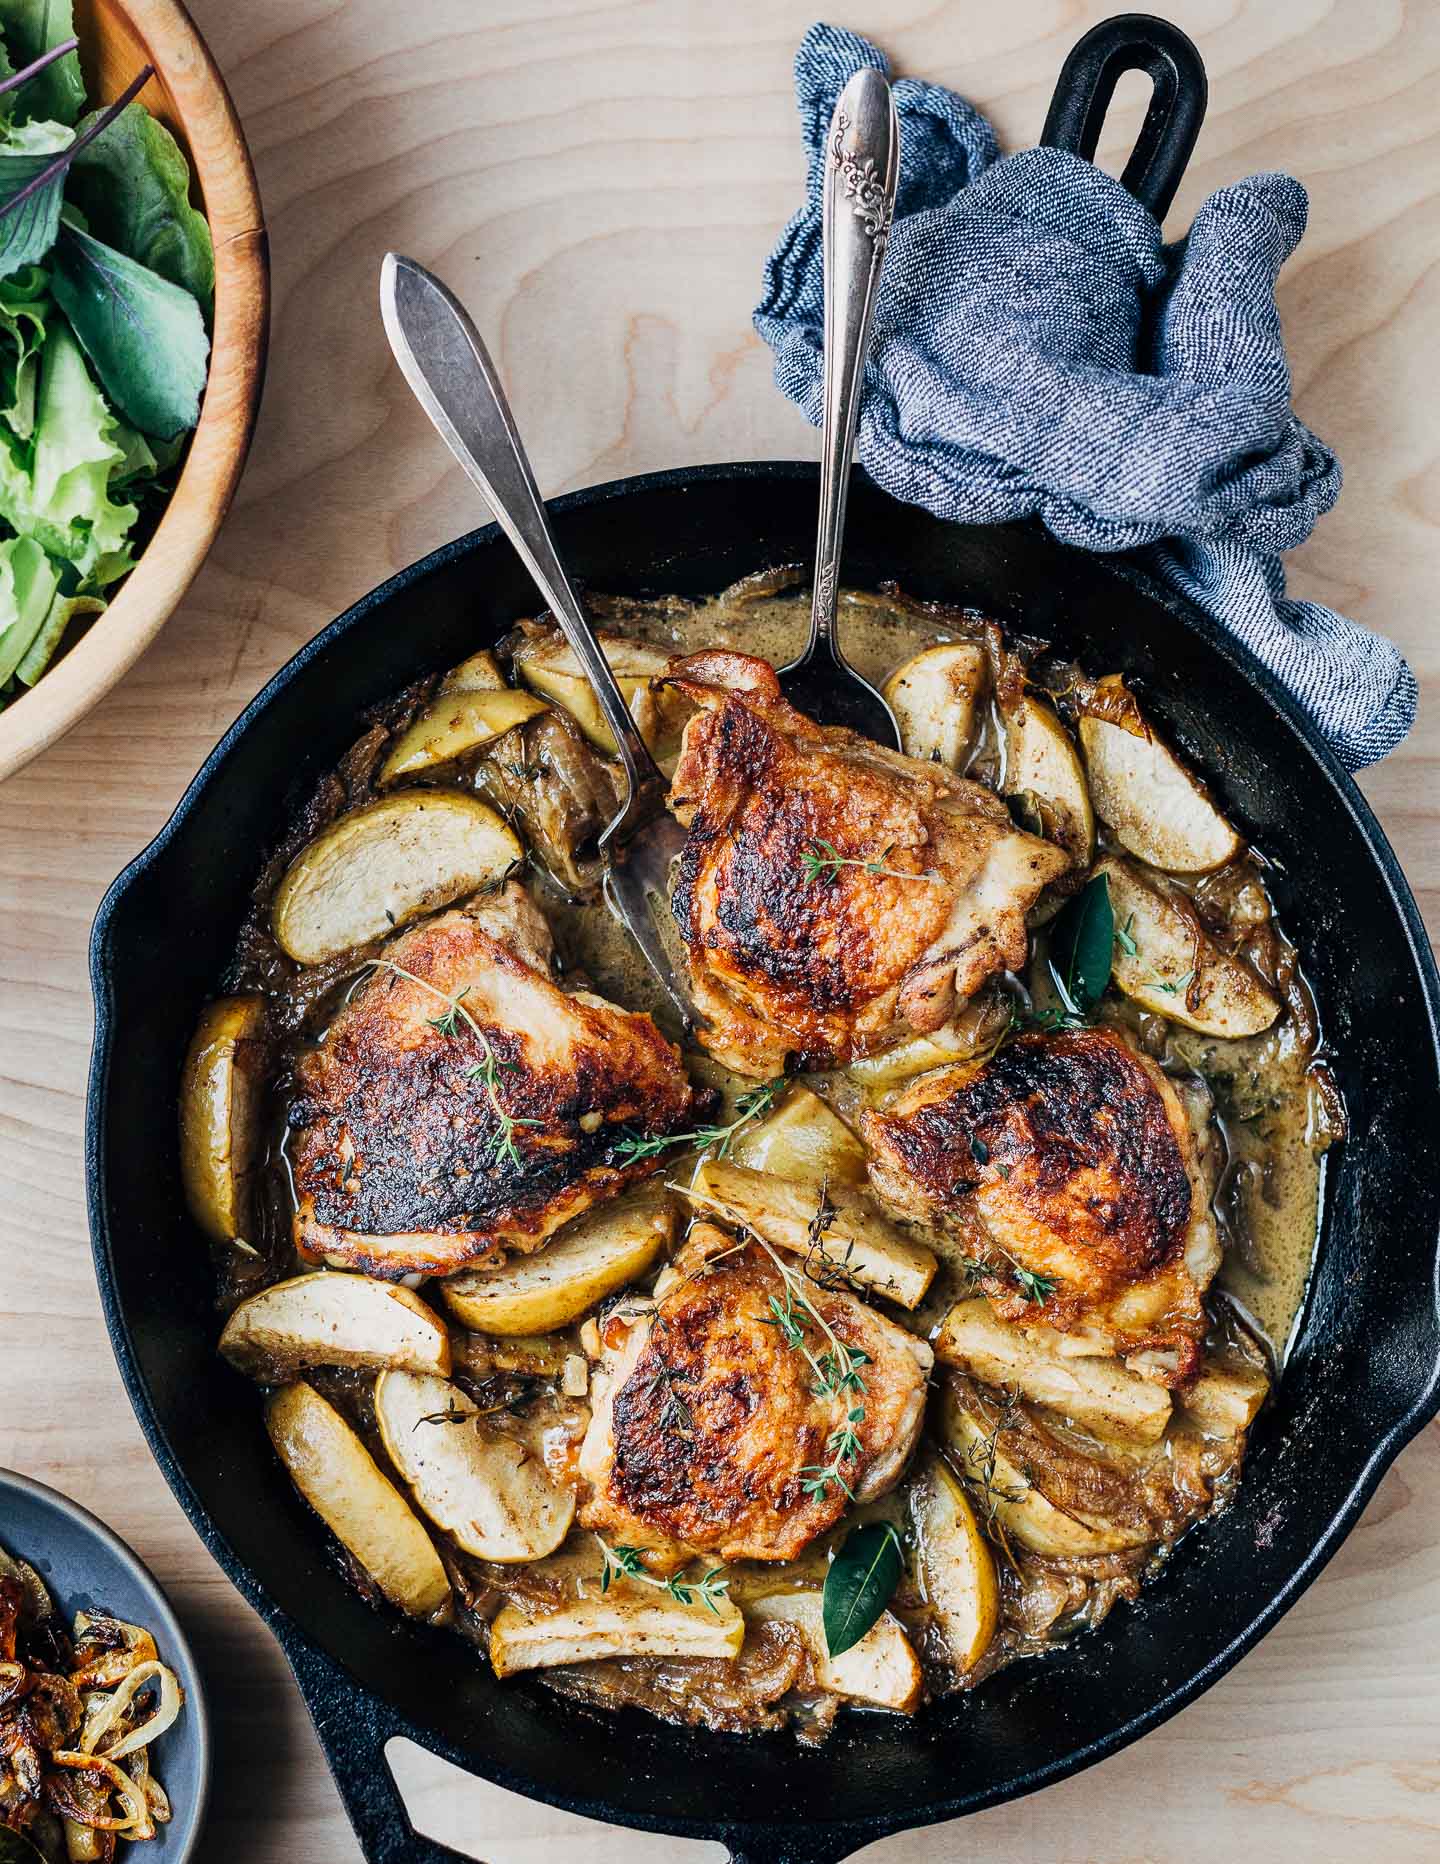 With crisp, golden skin and succulent meat, cider-braised chicken with apples, herbs, and caramelized onions makes for a classic autumn meal.